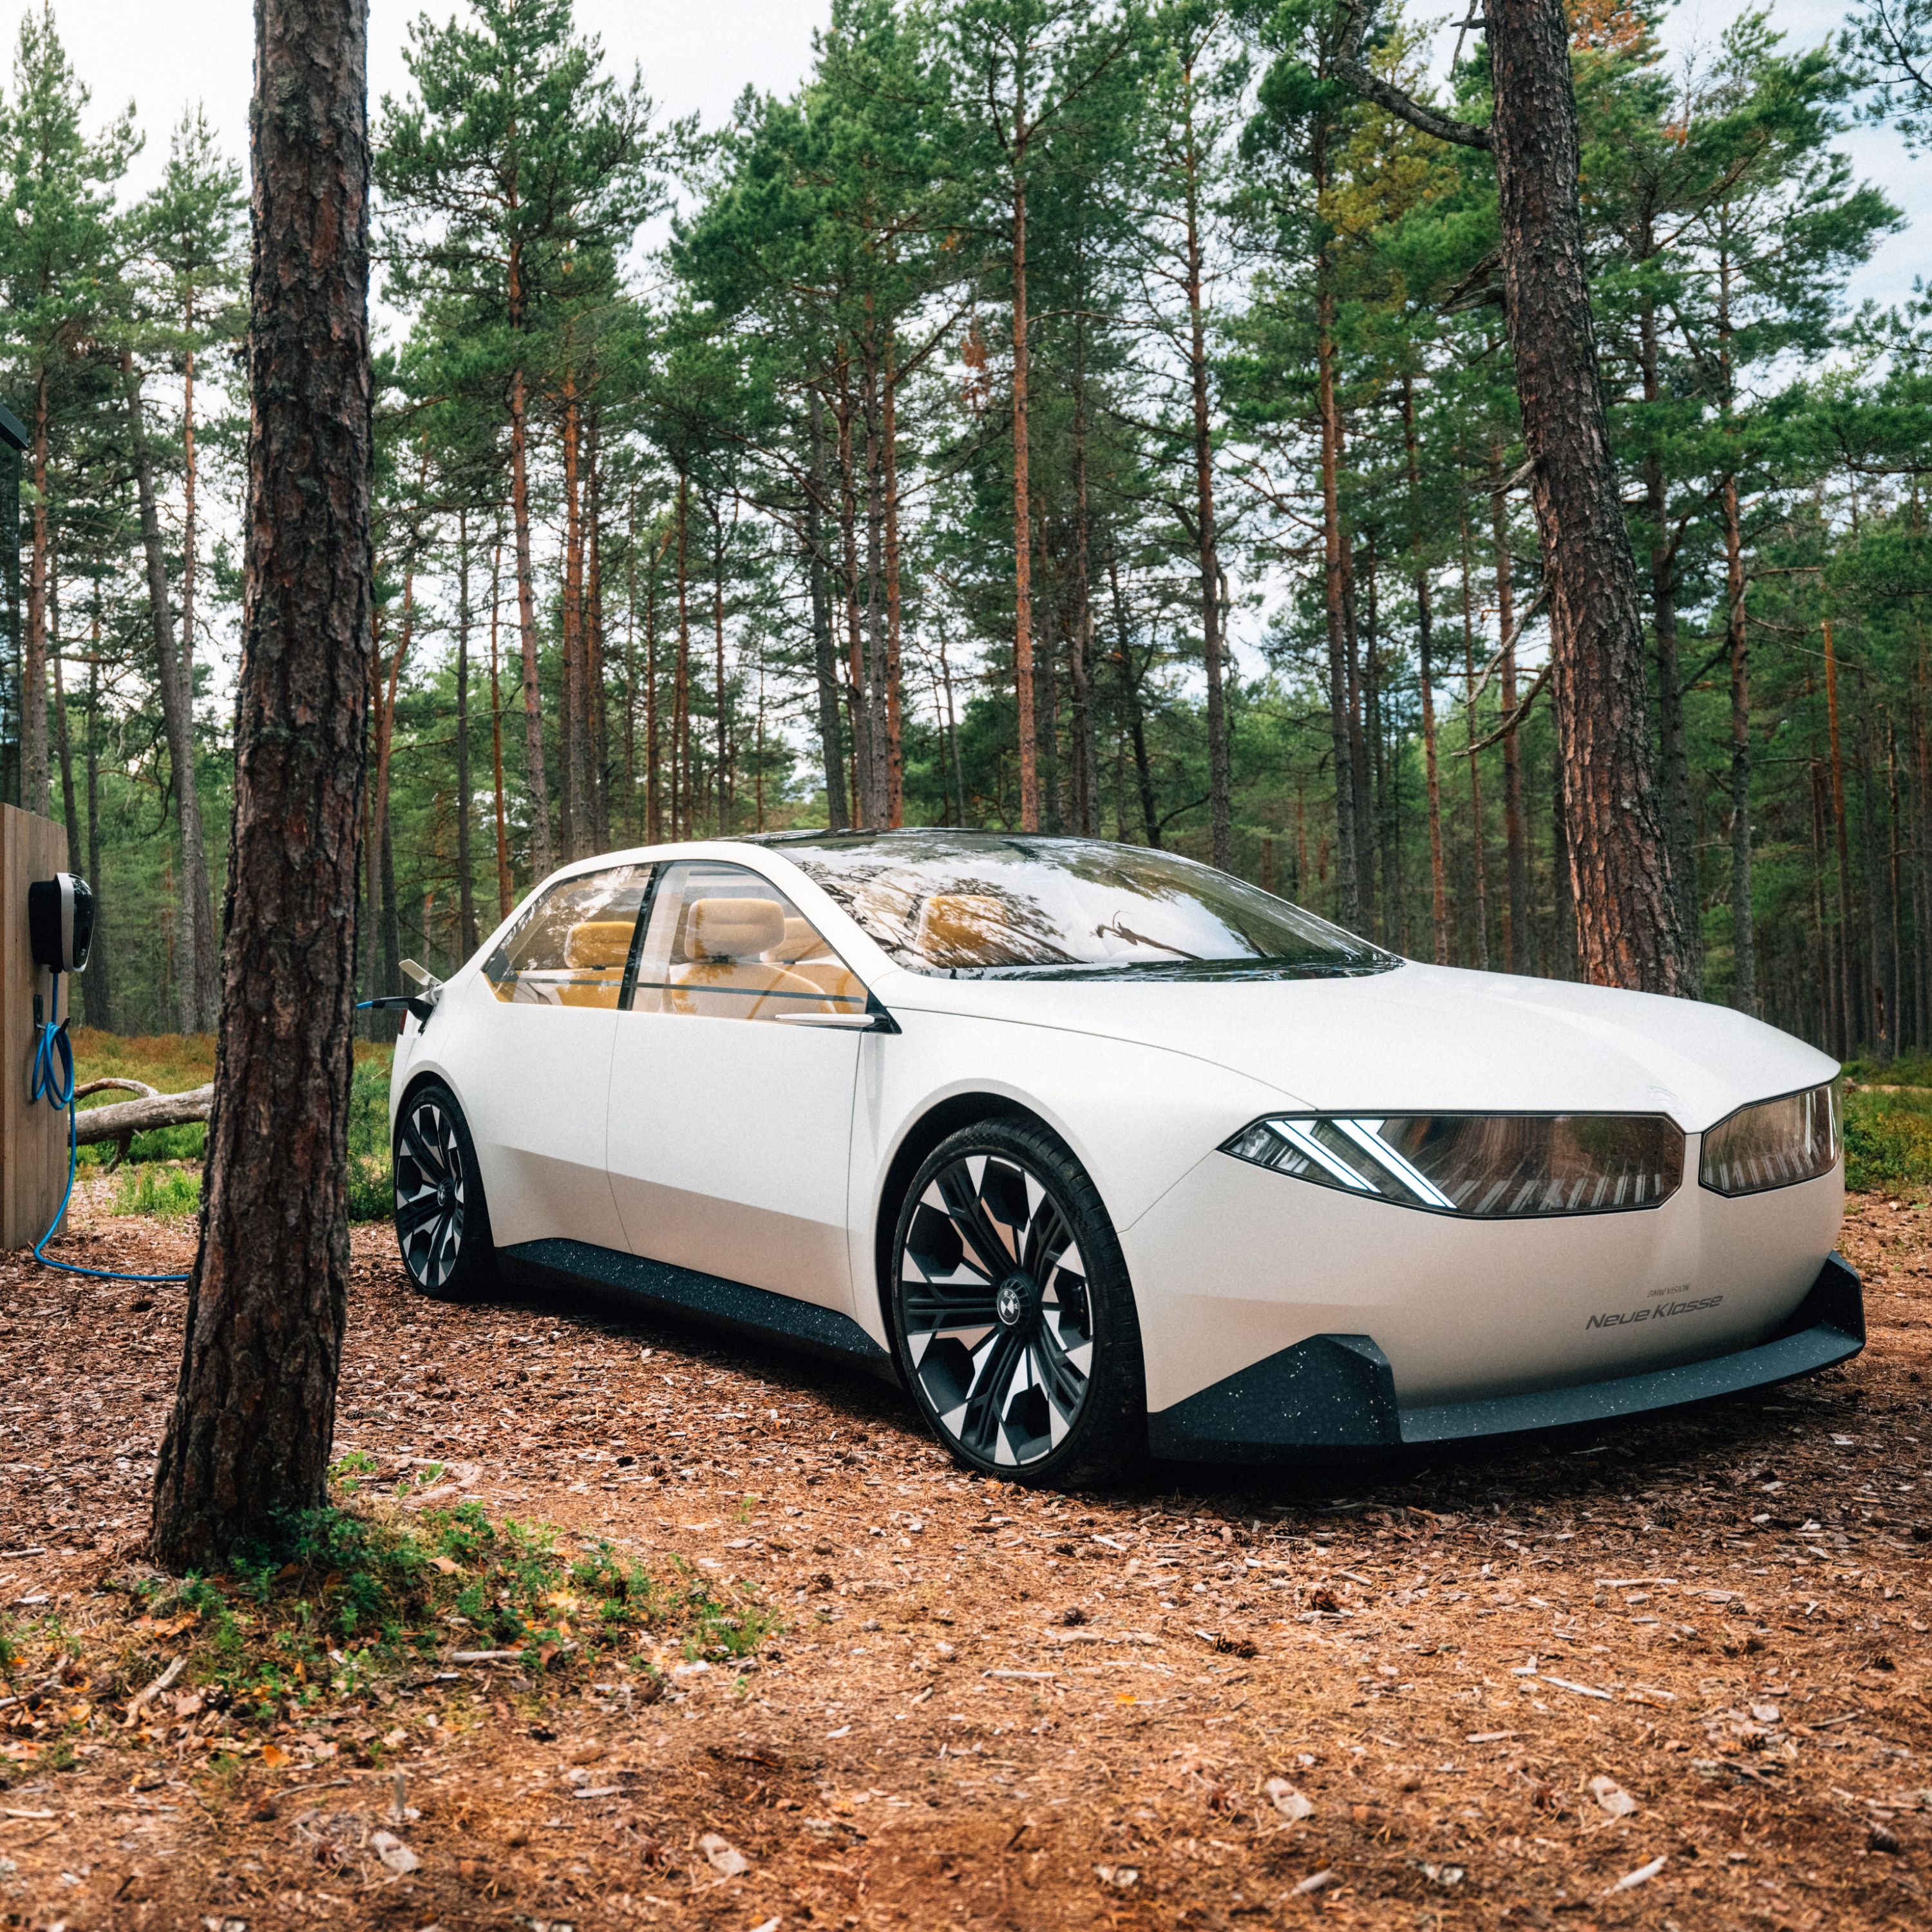 BMW Vision Neue Klasse 2/3 Concept vehicle 2023 exterior 2/3 side view, driving in forest